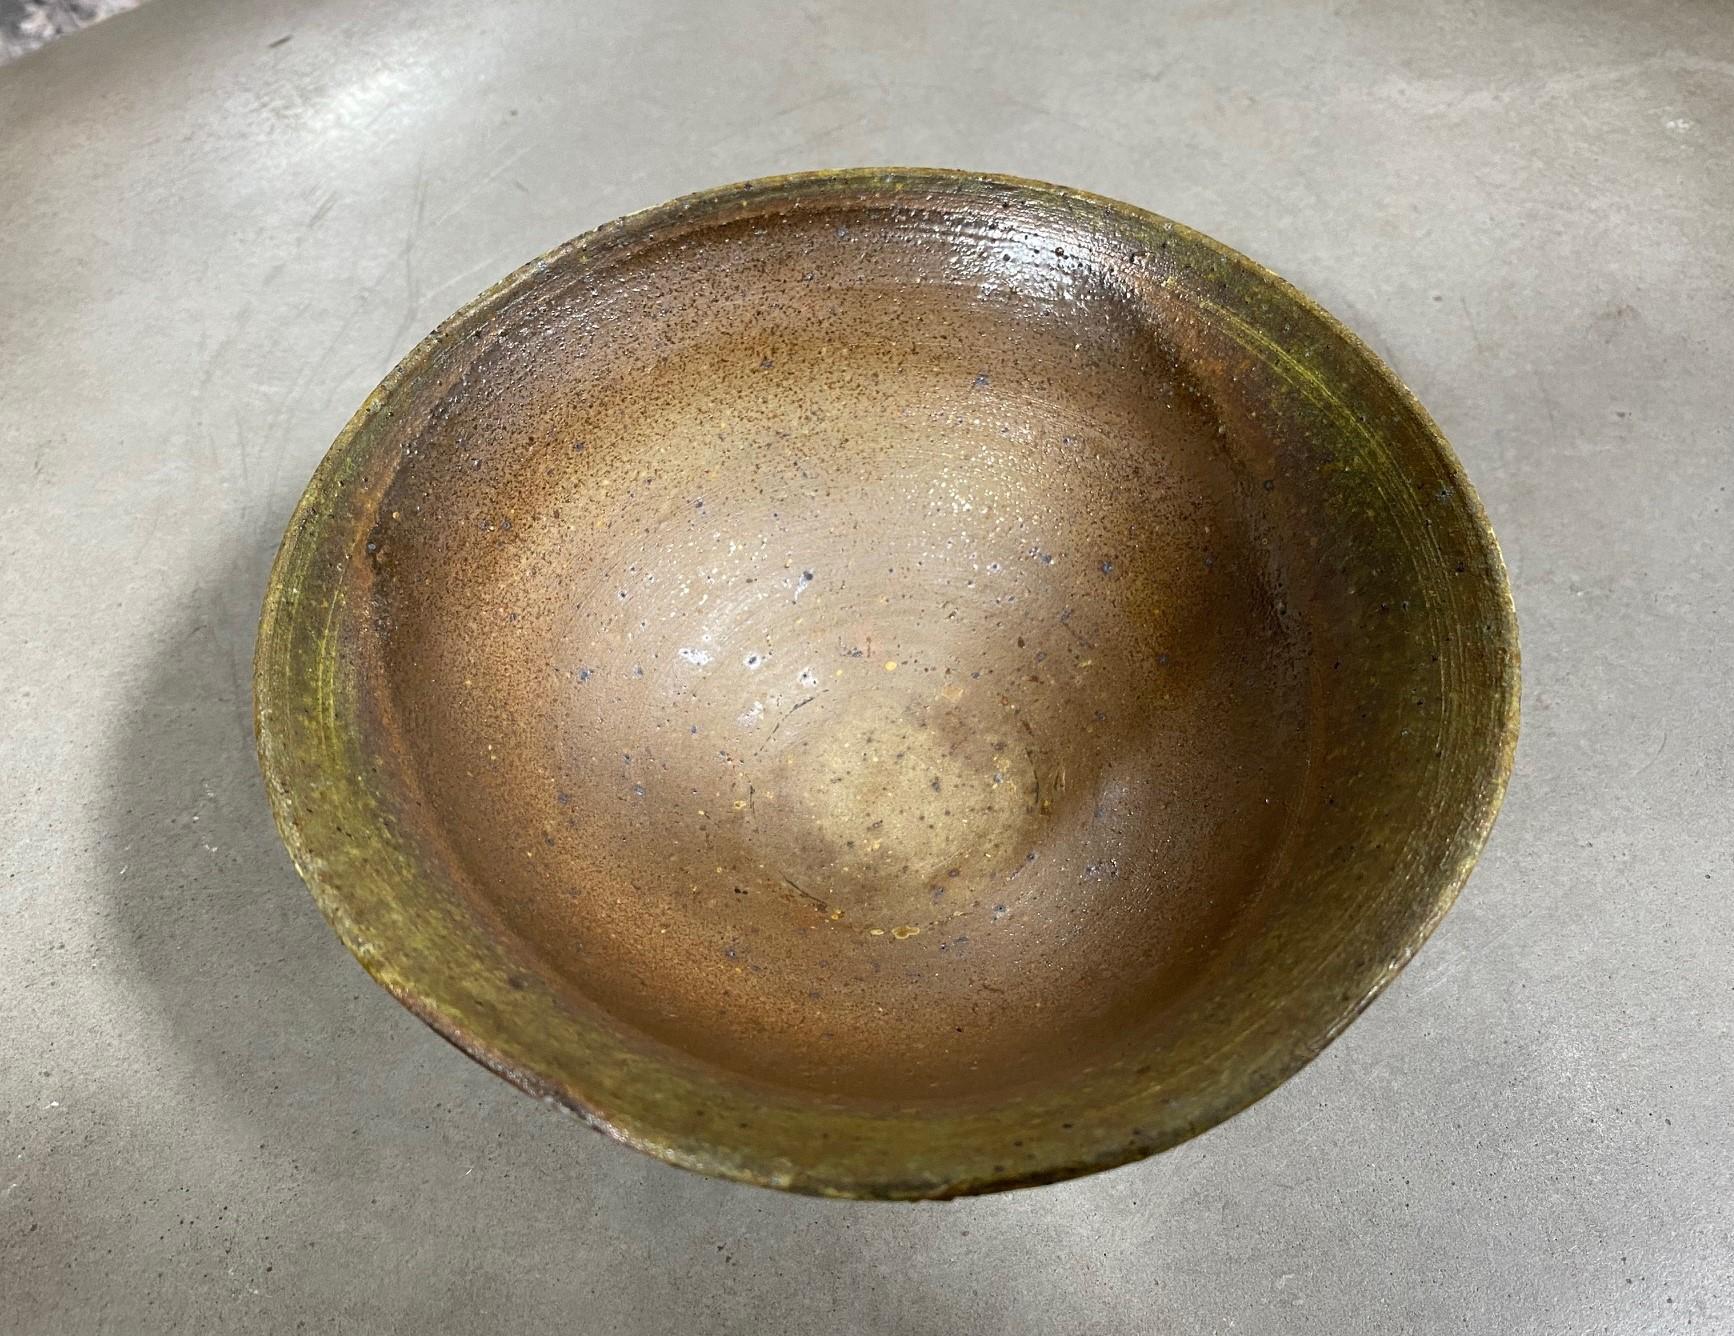 A wonderful and well crafted Japanese artisan bizen ware chawan tea bowl. Beautifully fired and colored. 

Japanese Bizen-Yaki pottery which dates back hundreds of years (its heyday was in the 16th century) is recognizable by its rustic quality